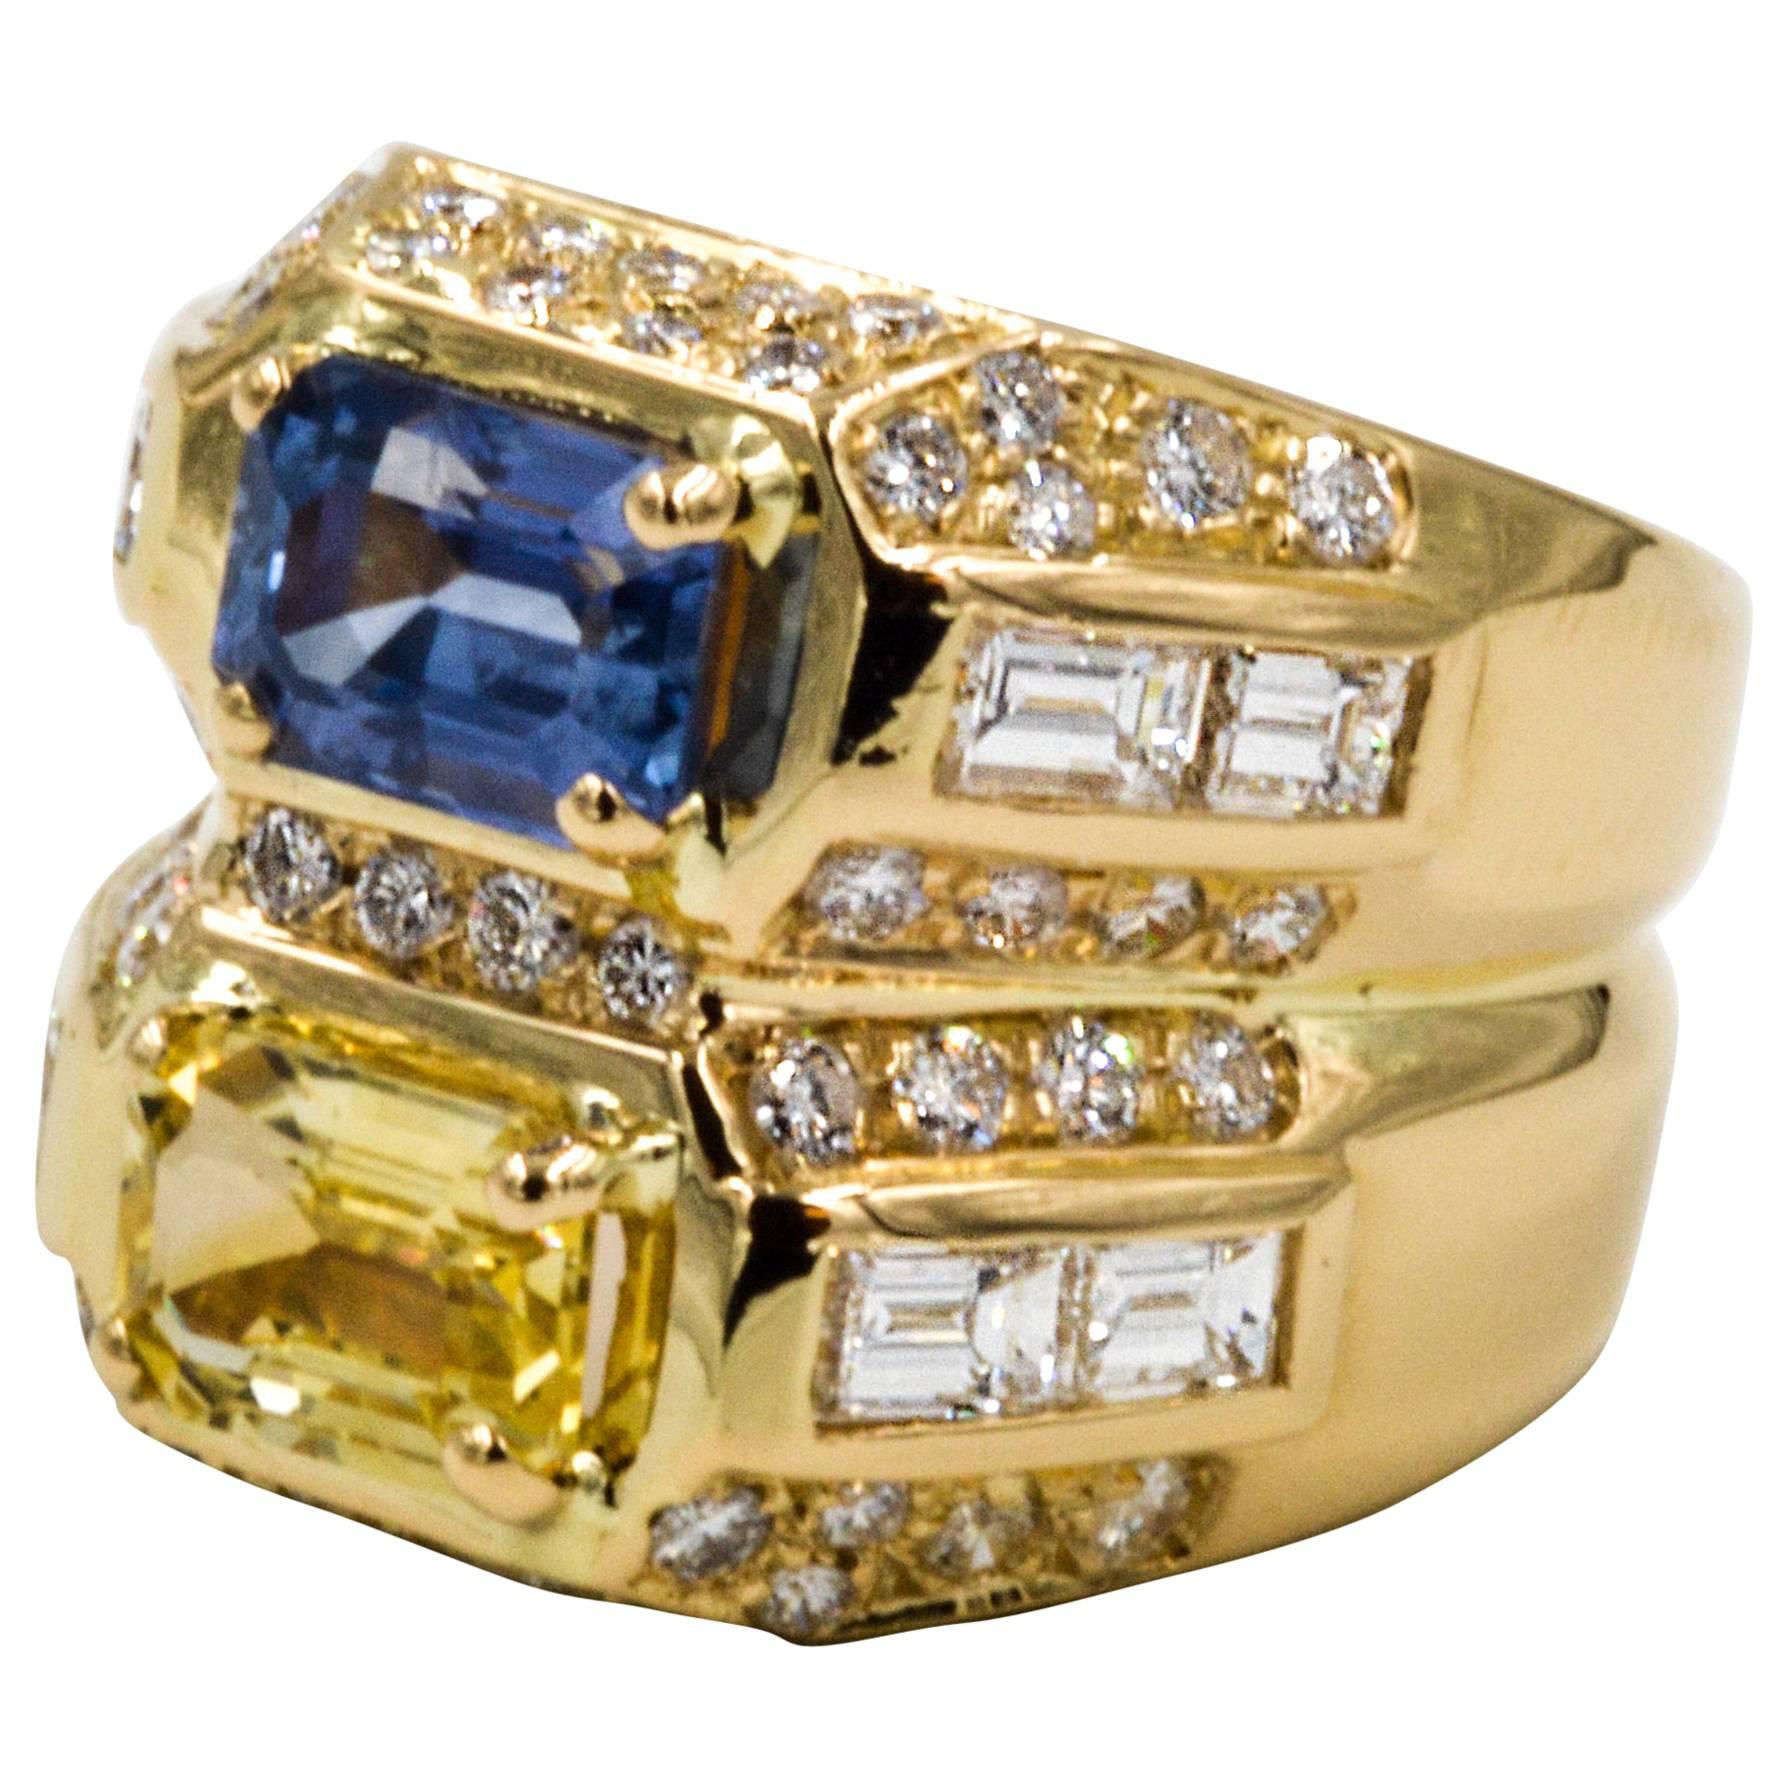 Twin Contrasting Yellow and Blue Sapphire 18 Karat Yellow Gold and Diamond Ring